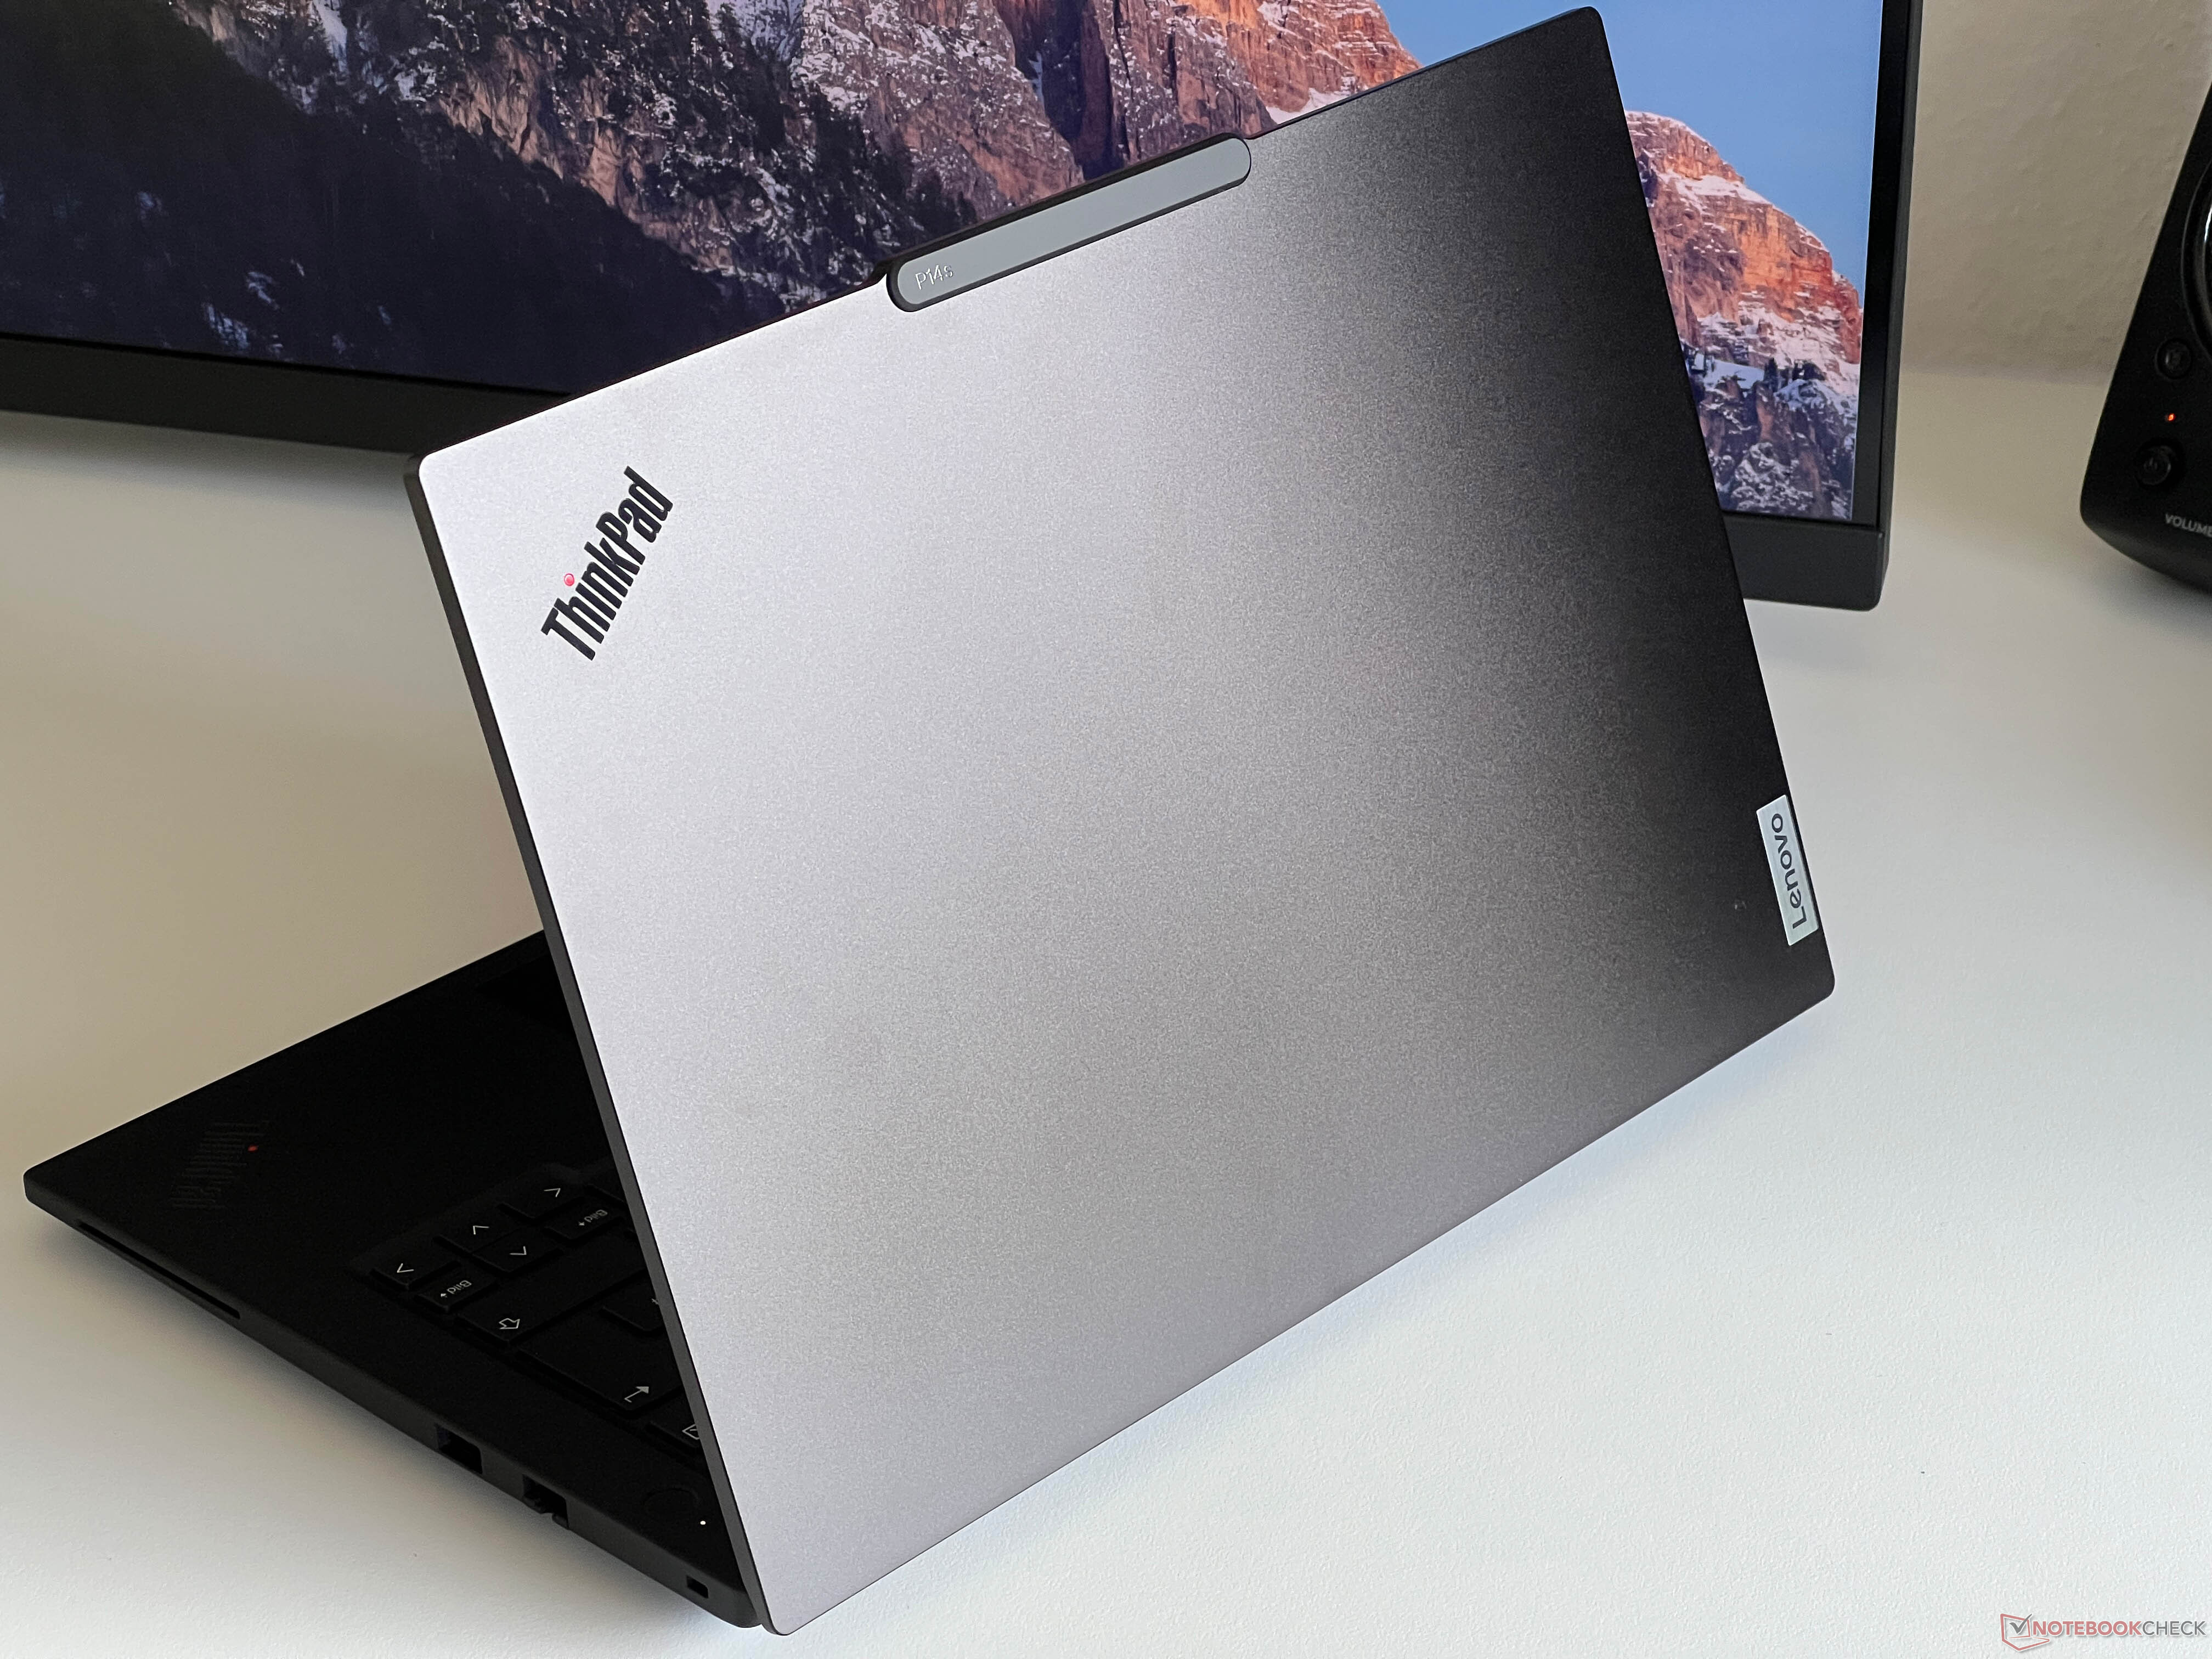 Lenovo ThinkPad P14s G5 Laptop Review – The Mobile Workstation Now with RTX 500 Ada and 3K IPS Display